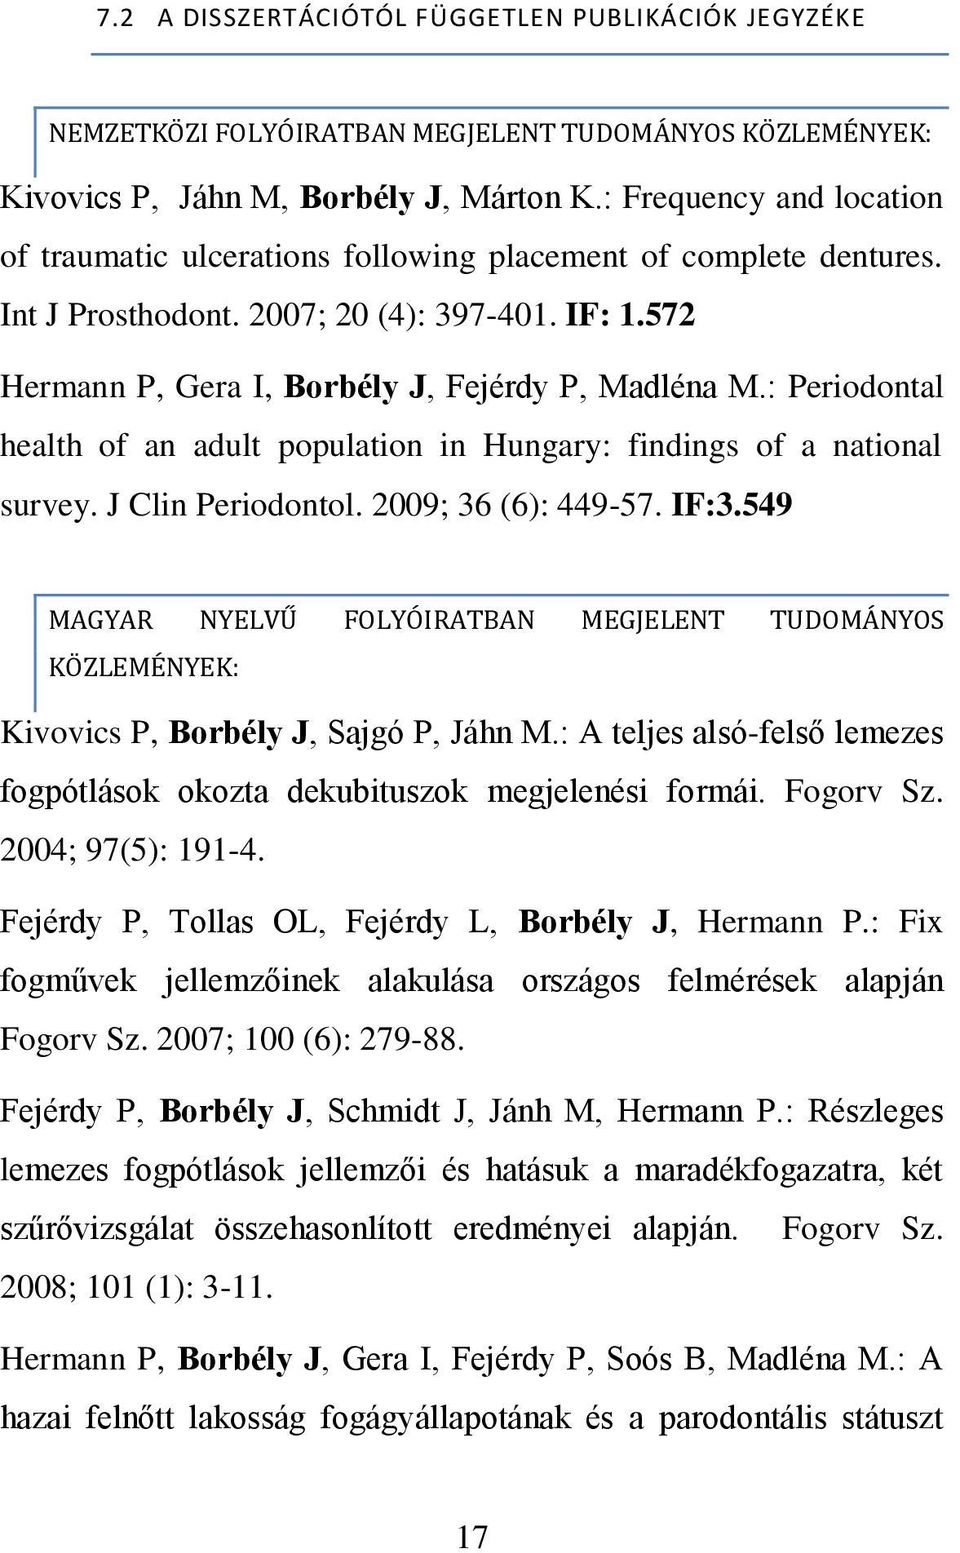 : Periodontal health of an adult population in Hungary: findings of a national survey. J Clin Periodontol. 2009; 36 (6): 449-57. IF:3.